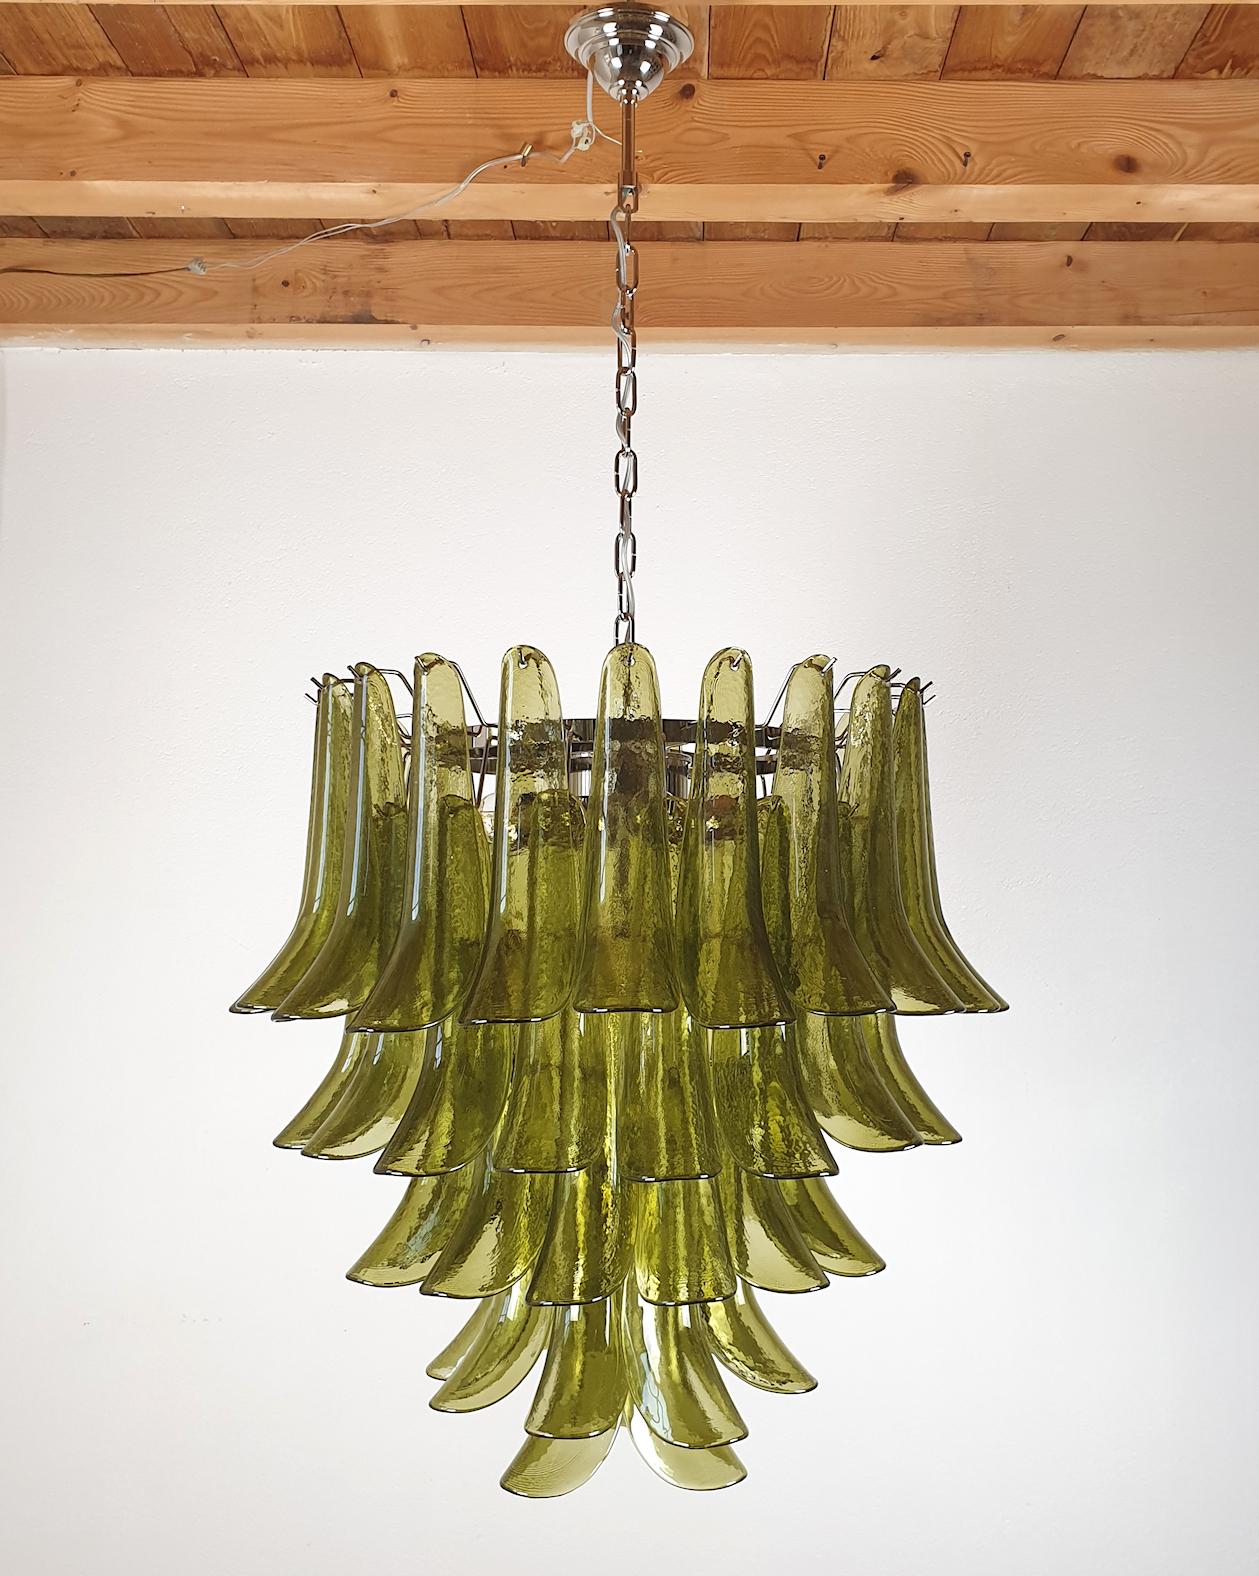 Mid-Century Modern five-tier Green Murano glass chandelier, by Mazzega, Italy, late 1970s.
Two chandeliers available: priced and sold individually.
The Vintage Murano chandelier is made of delicate handmade glass, and a chrome frame.
The